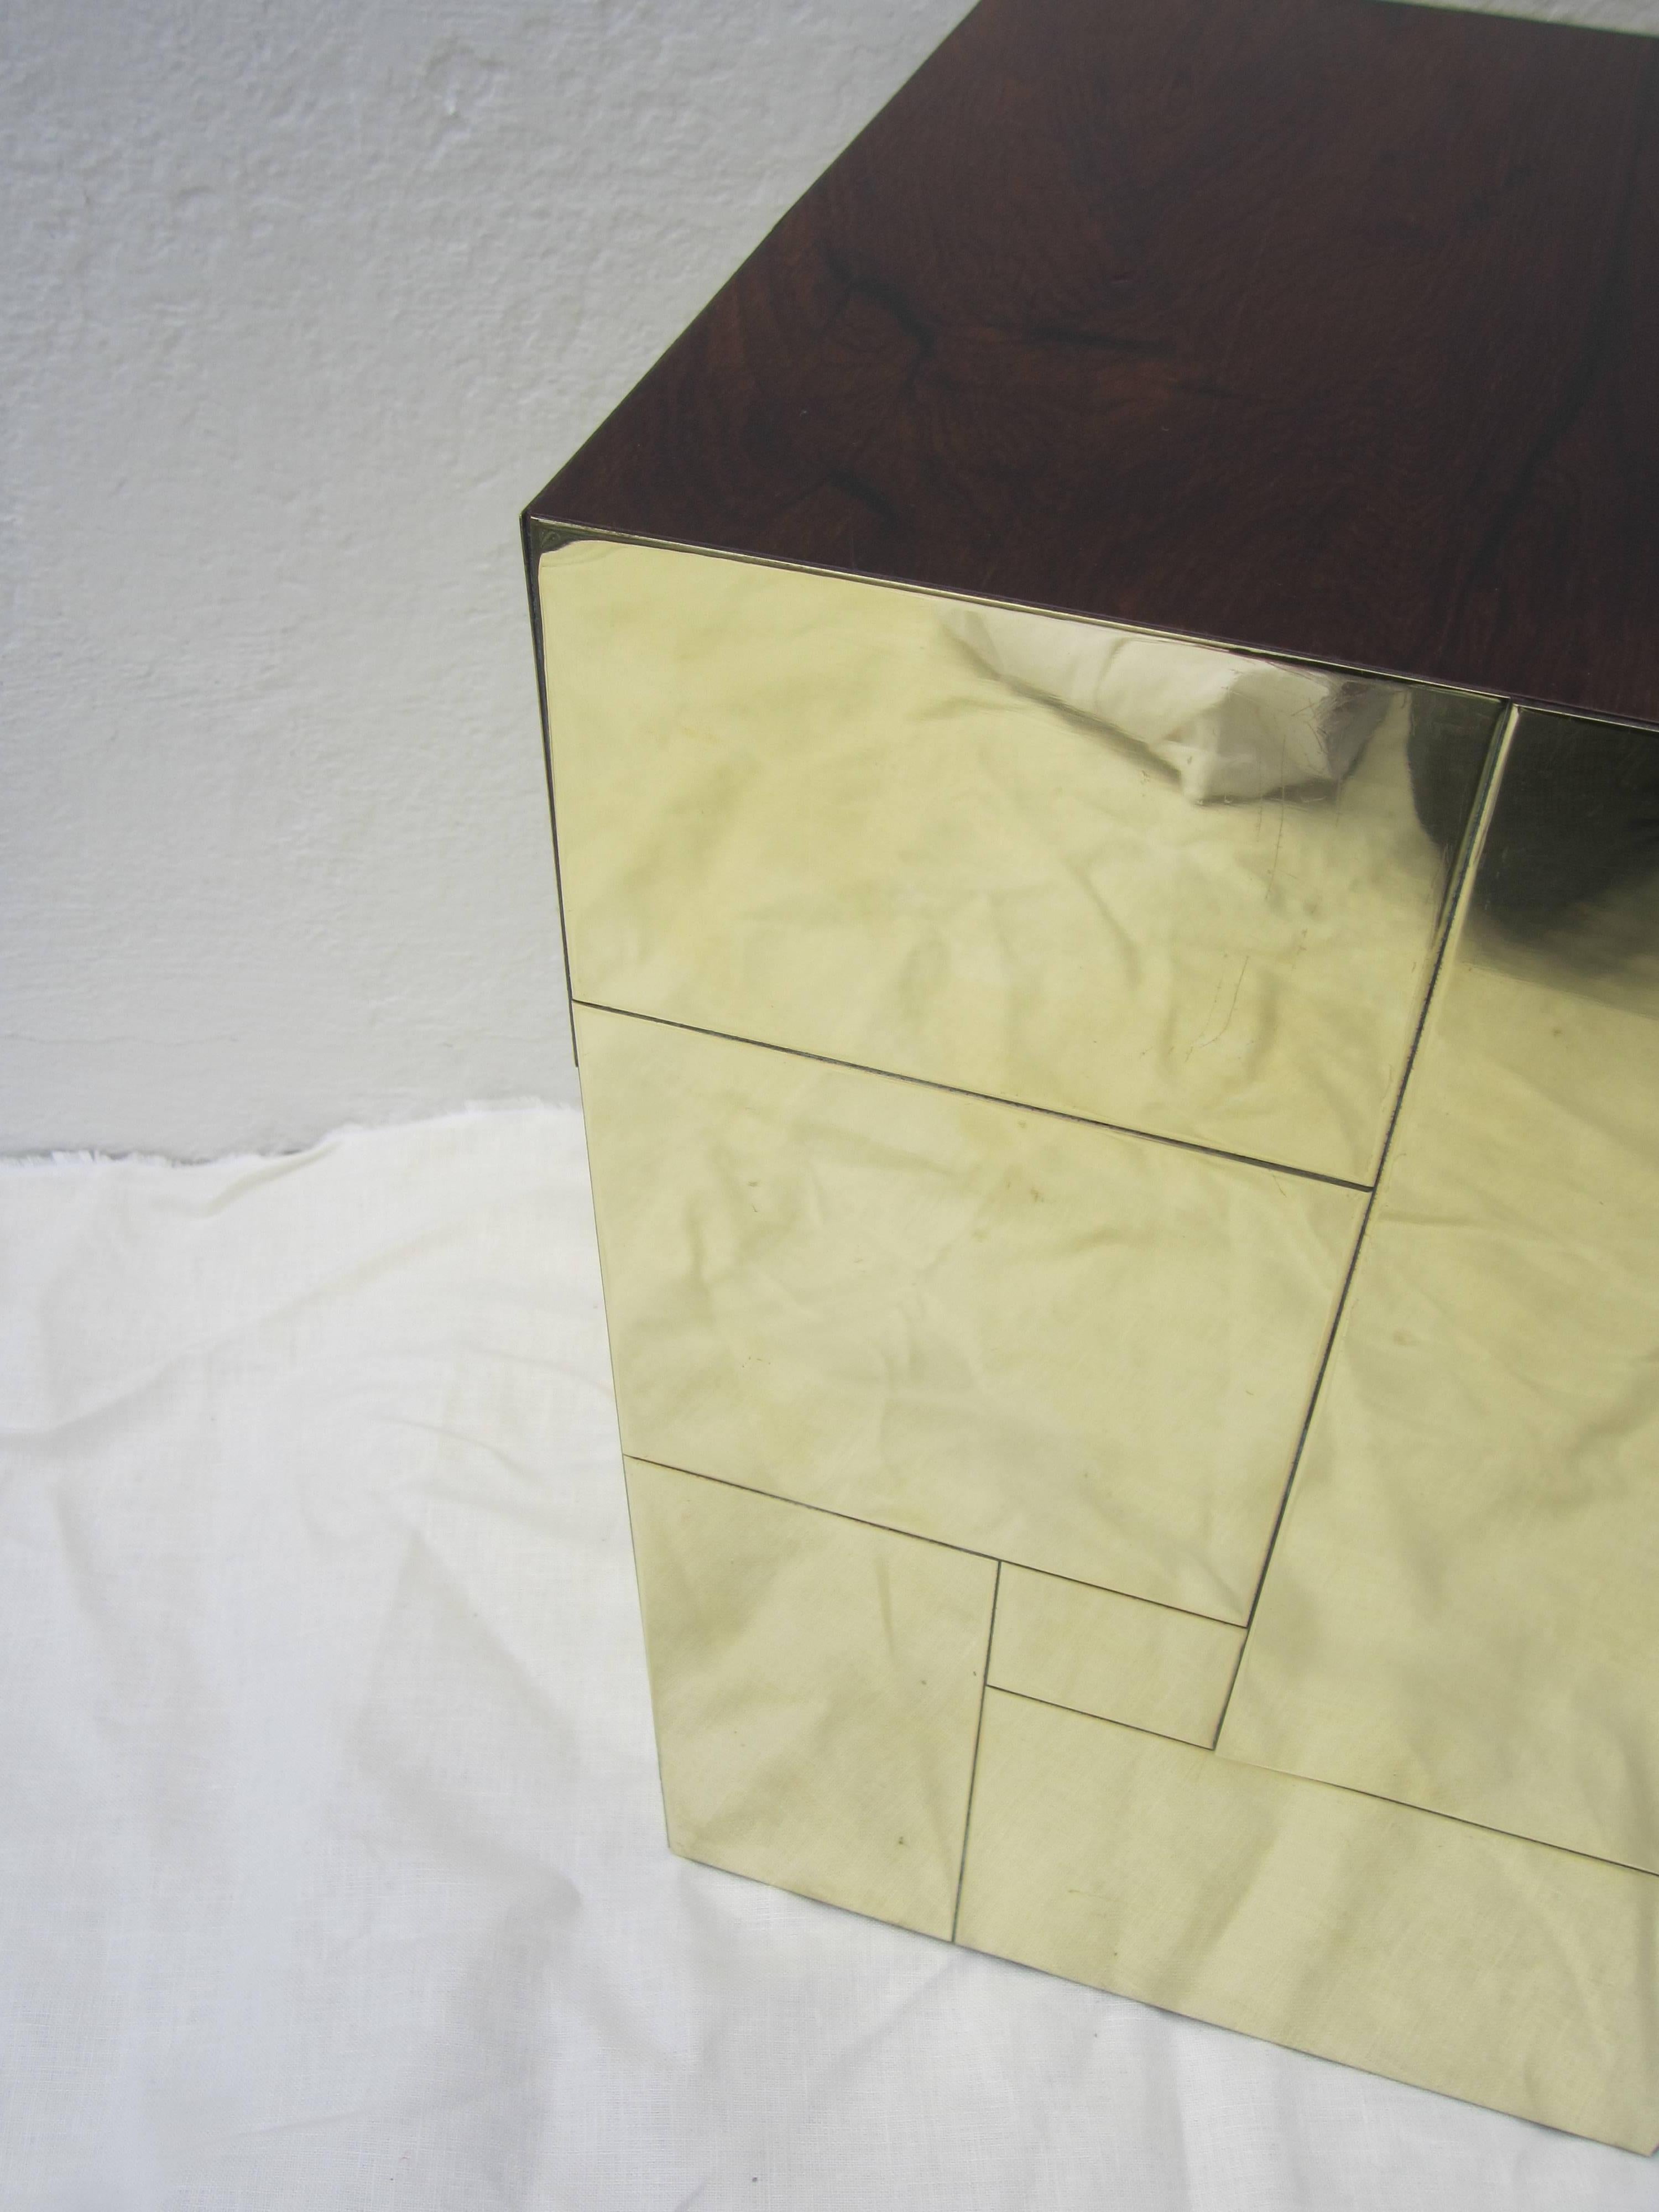 Paul Evans Cityscape Side Table In Excellent Condition For Sale In East Hampton, NY